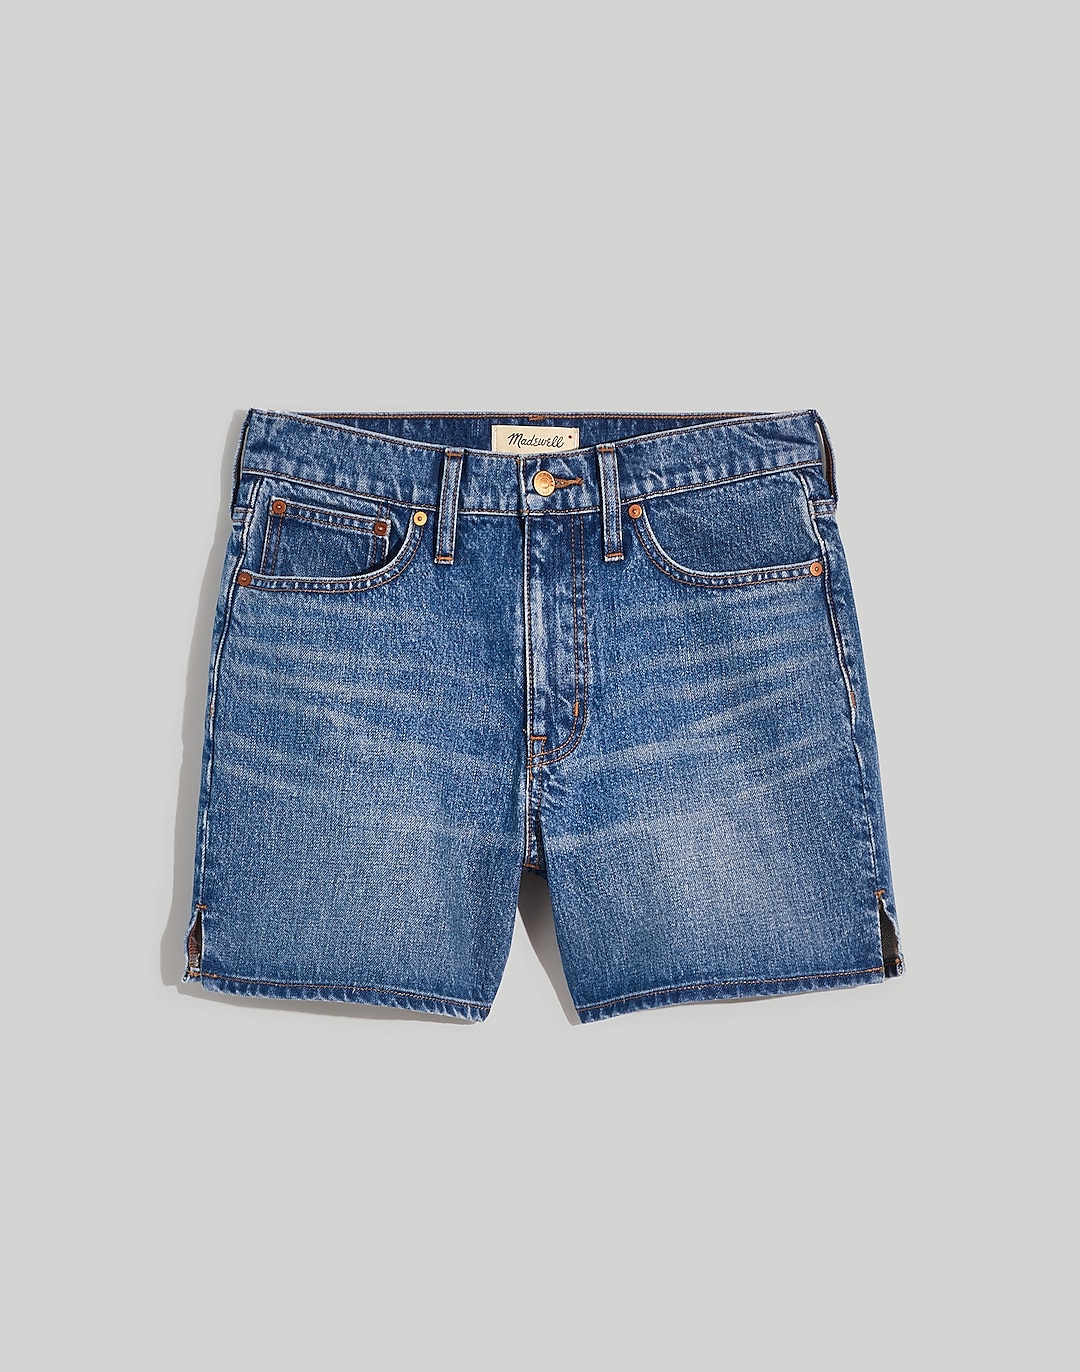 Relaxed Mid-Length Denim Shorts in Brockport Wash | Madewell